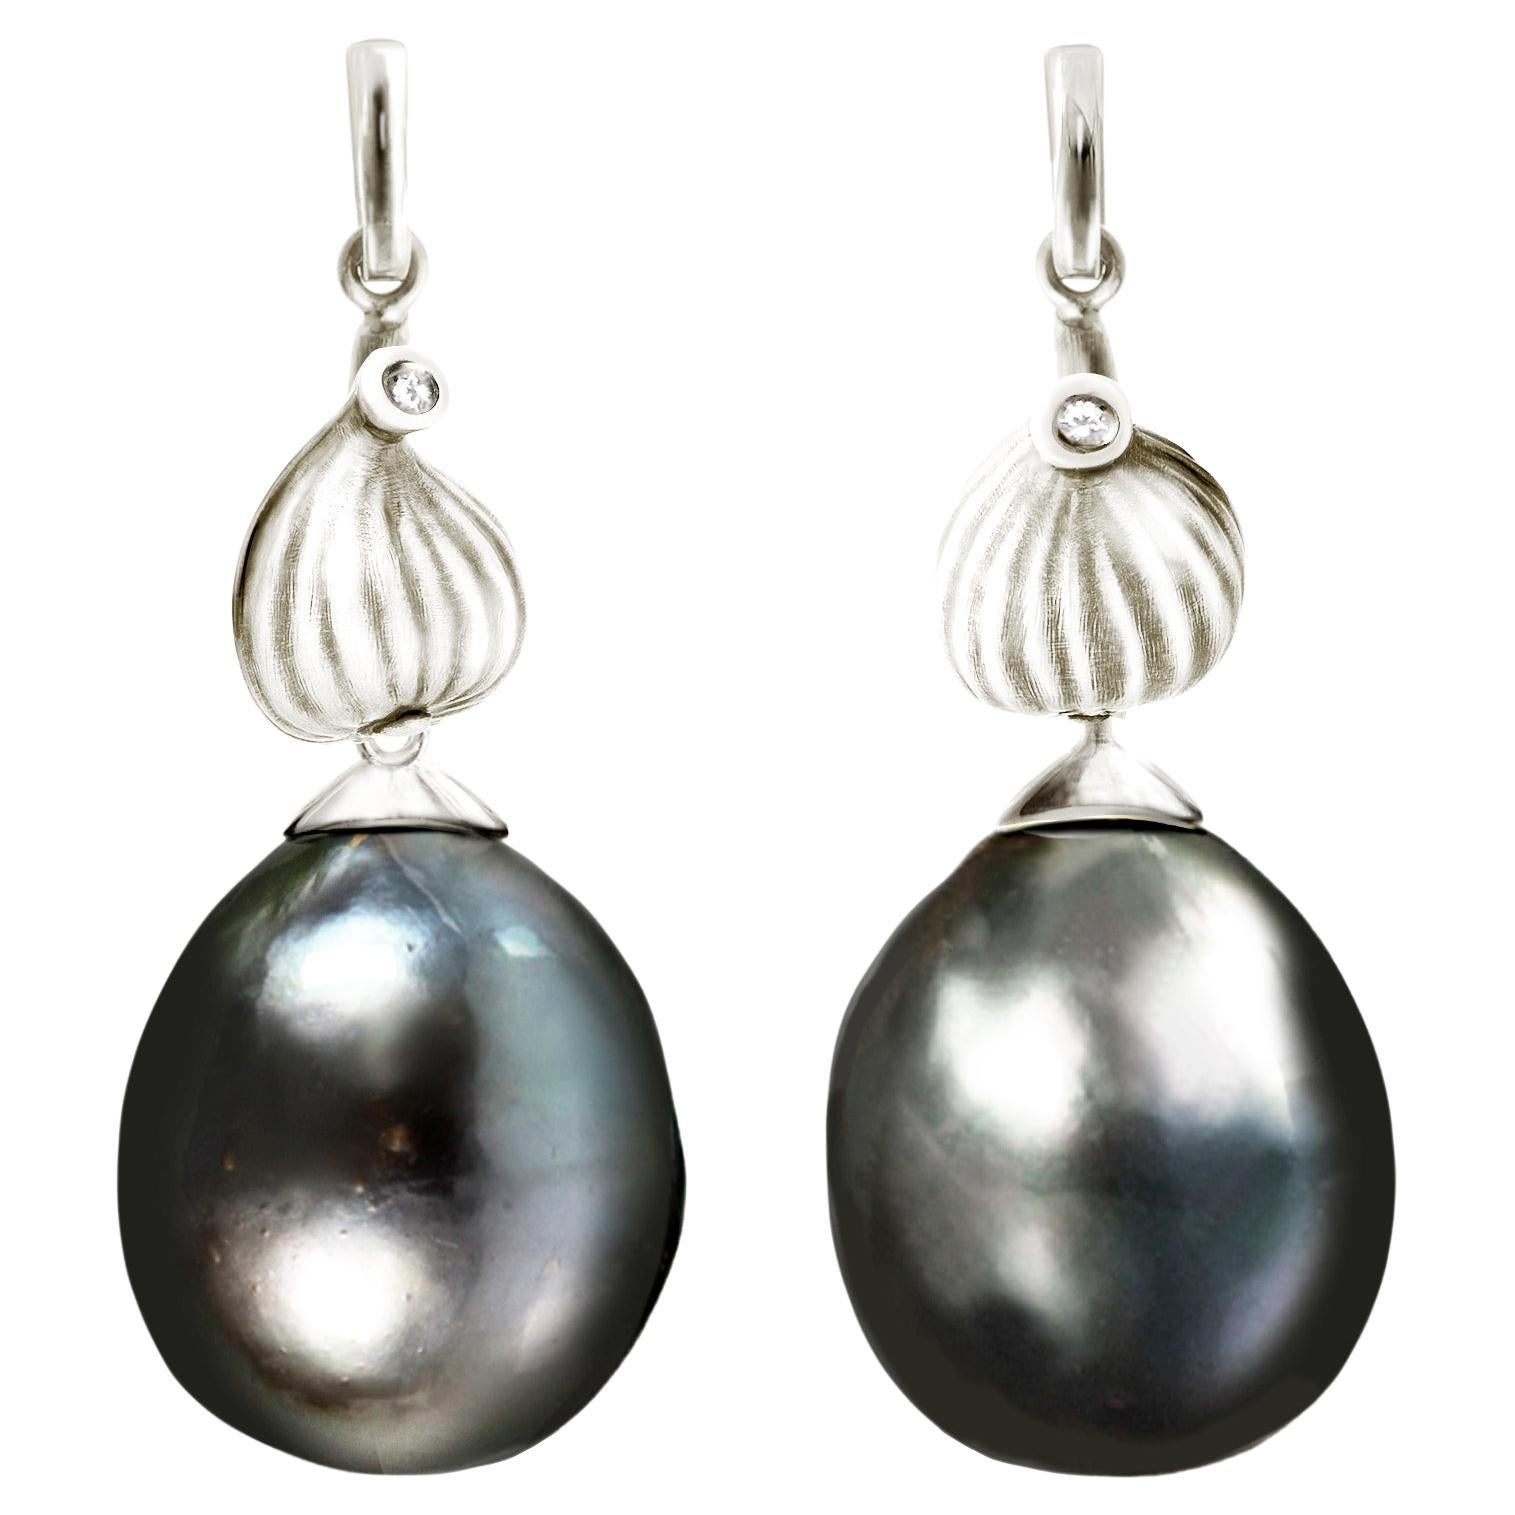 Detachable Pearls Eighteen Karat White Gold Contemporary Earrings with Diamonds